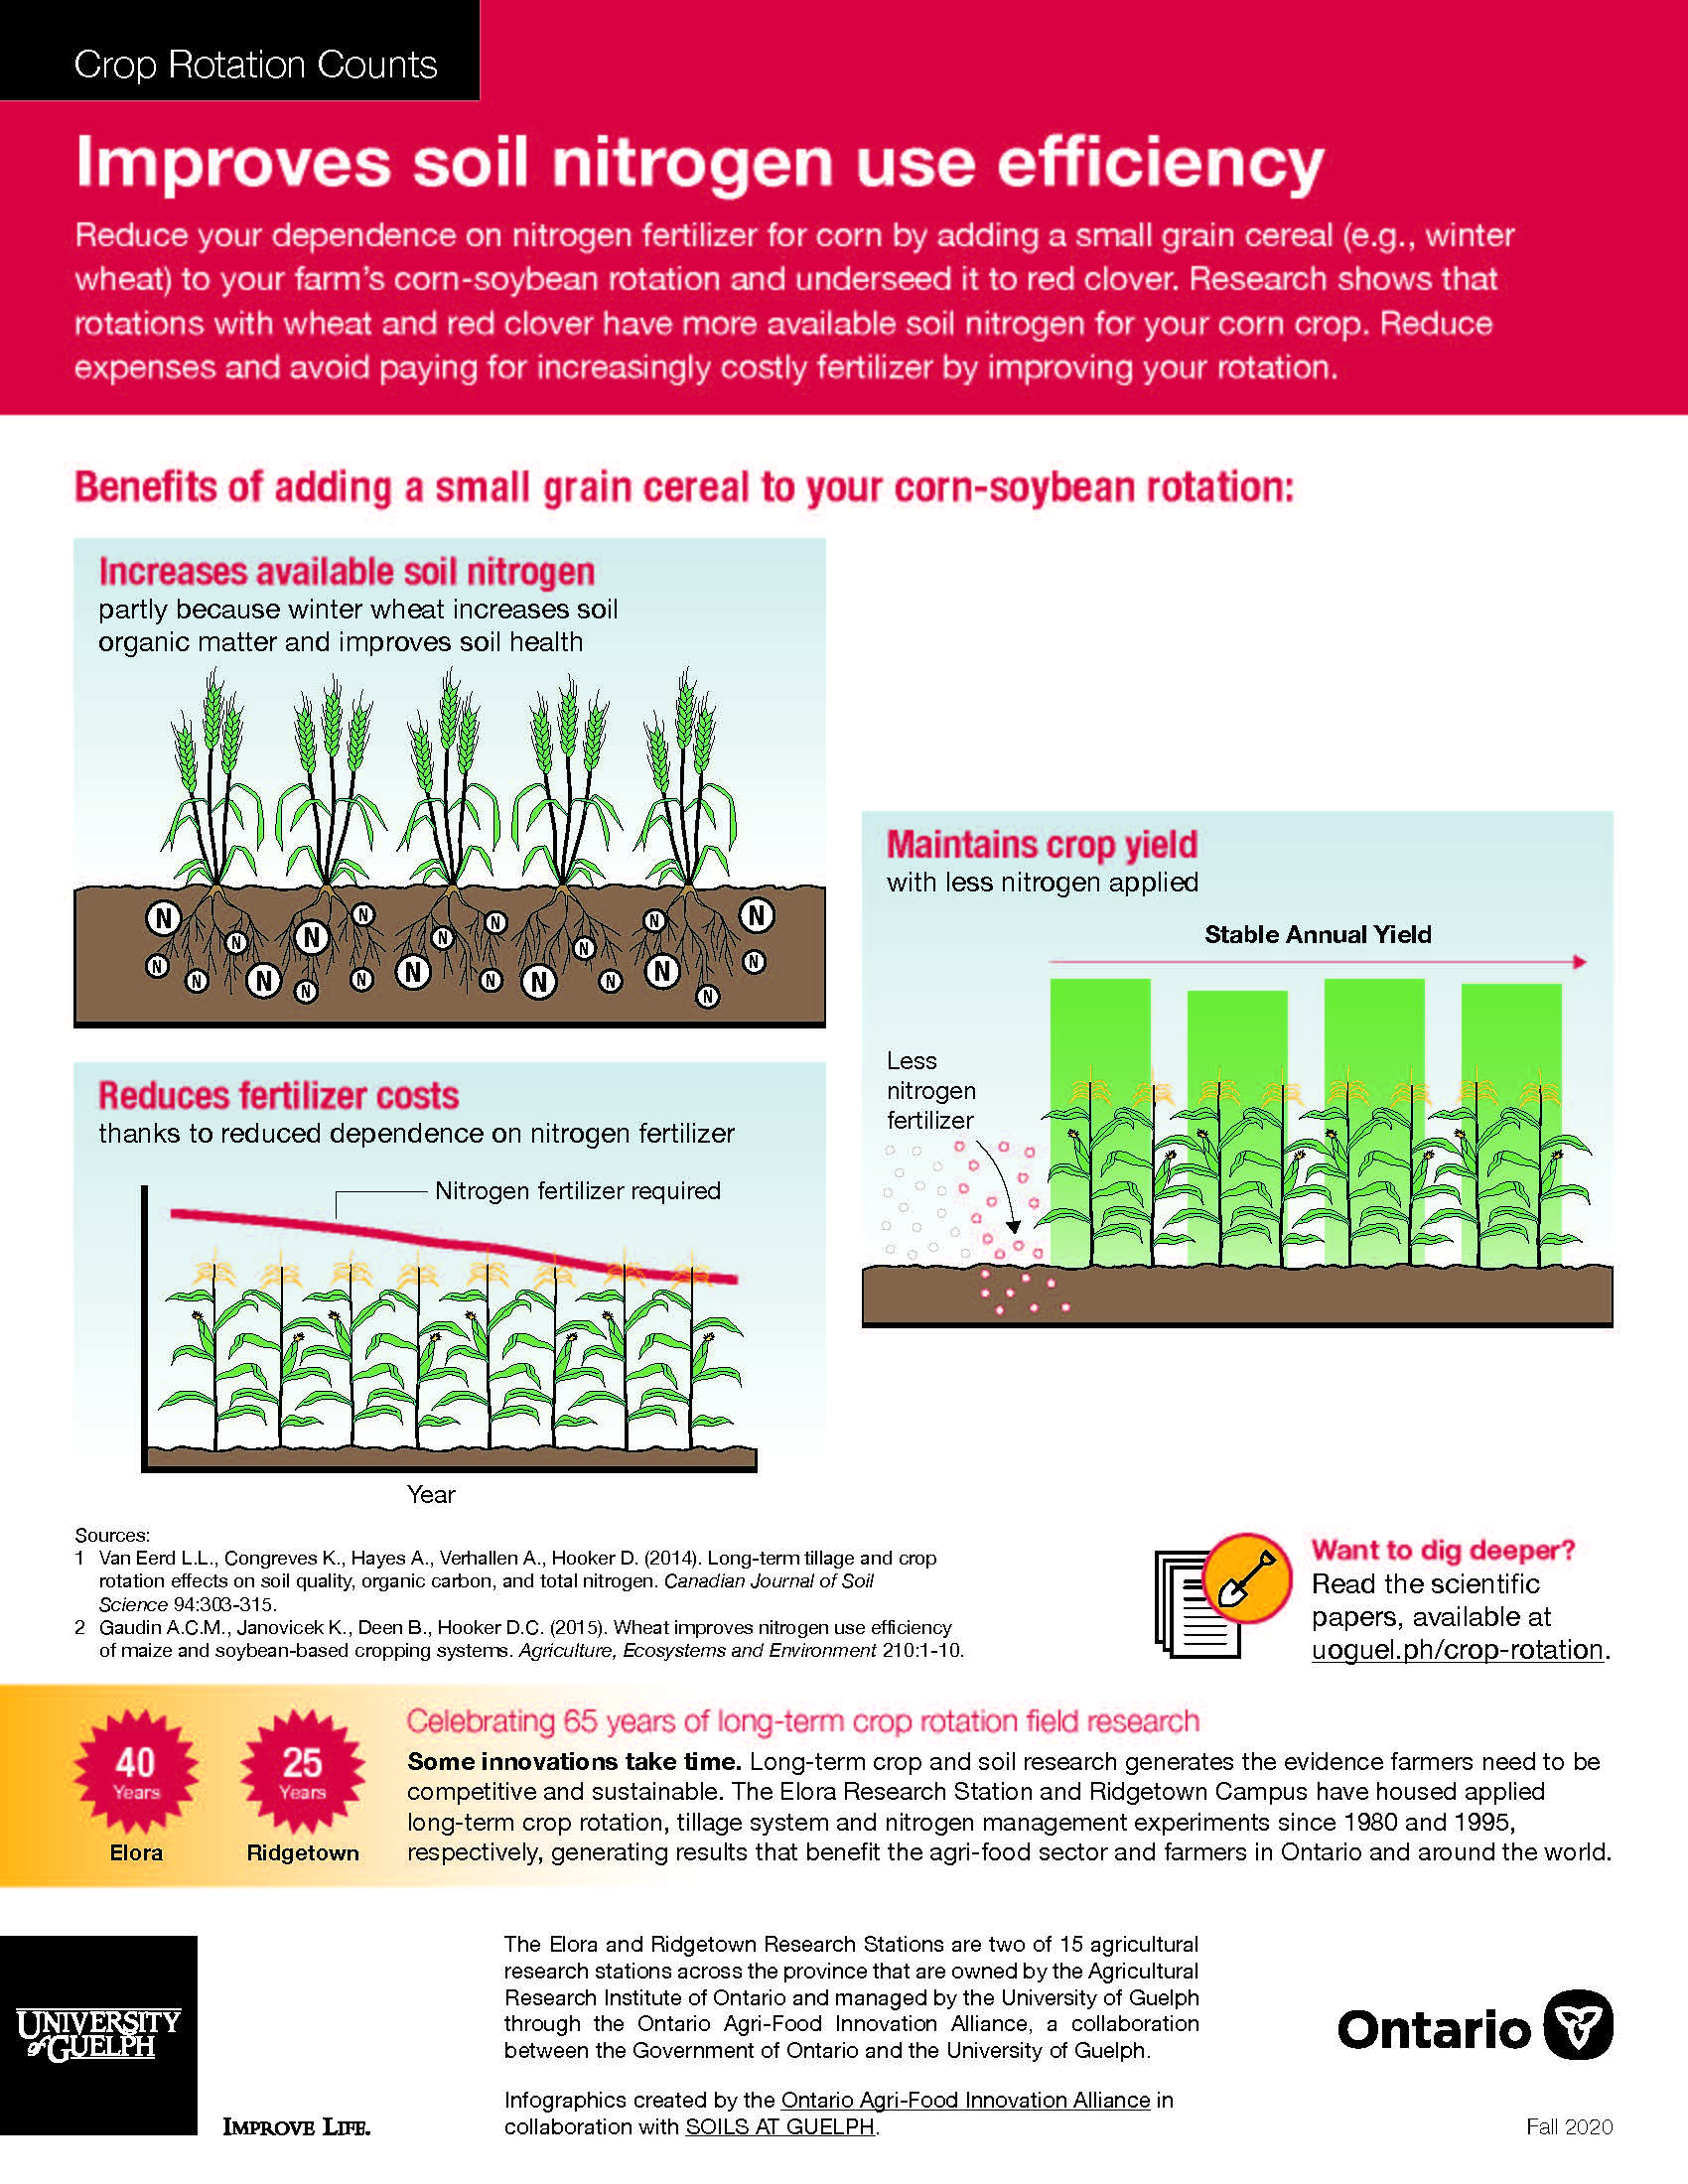 CROP ROTATION COUNTS: IMPROVES SOIL NITROGEN USE EFFICIENCY infographic. Text version follows.